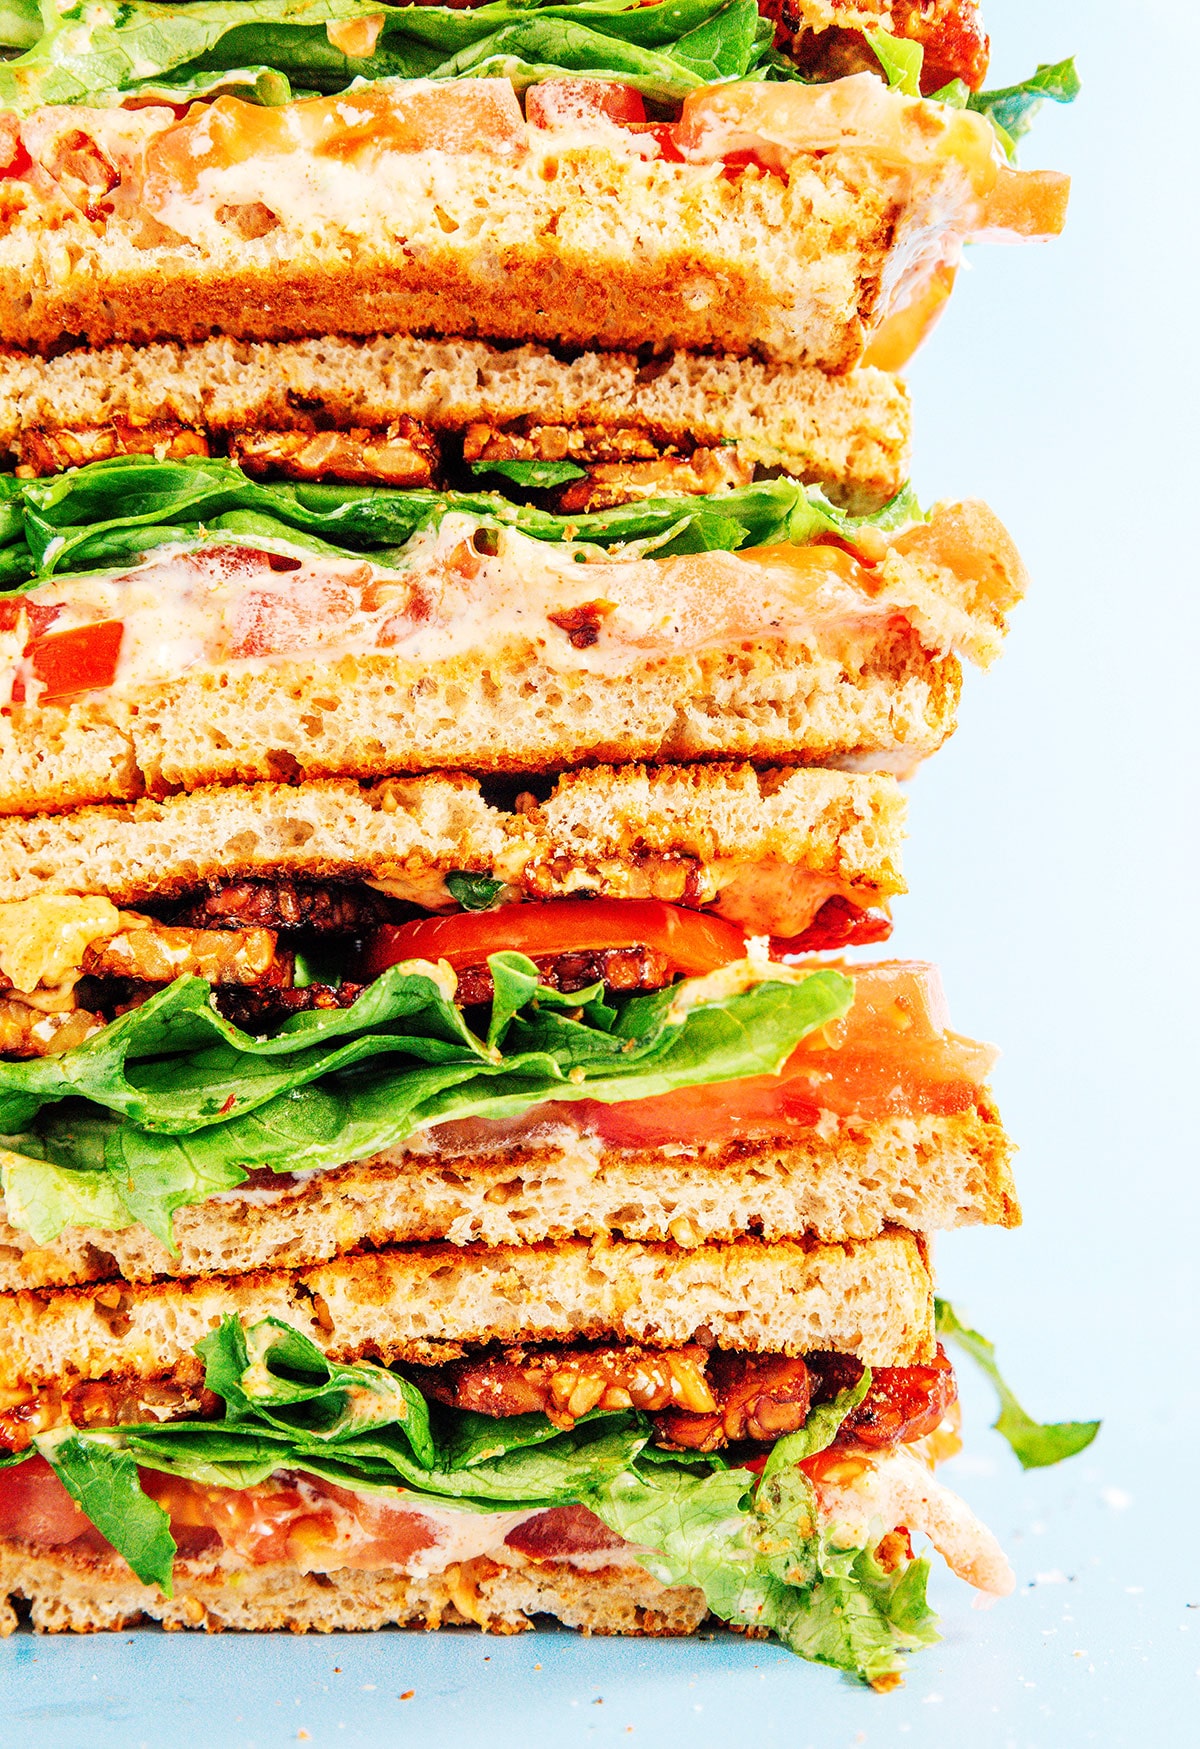 Tempeh bacon BLT sandwiches in a stack.